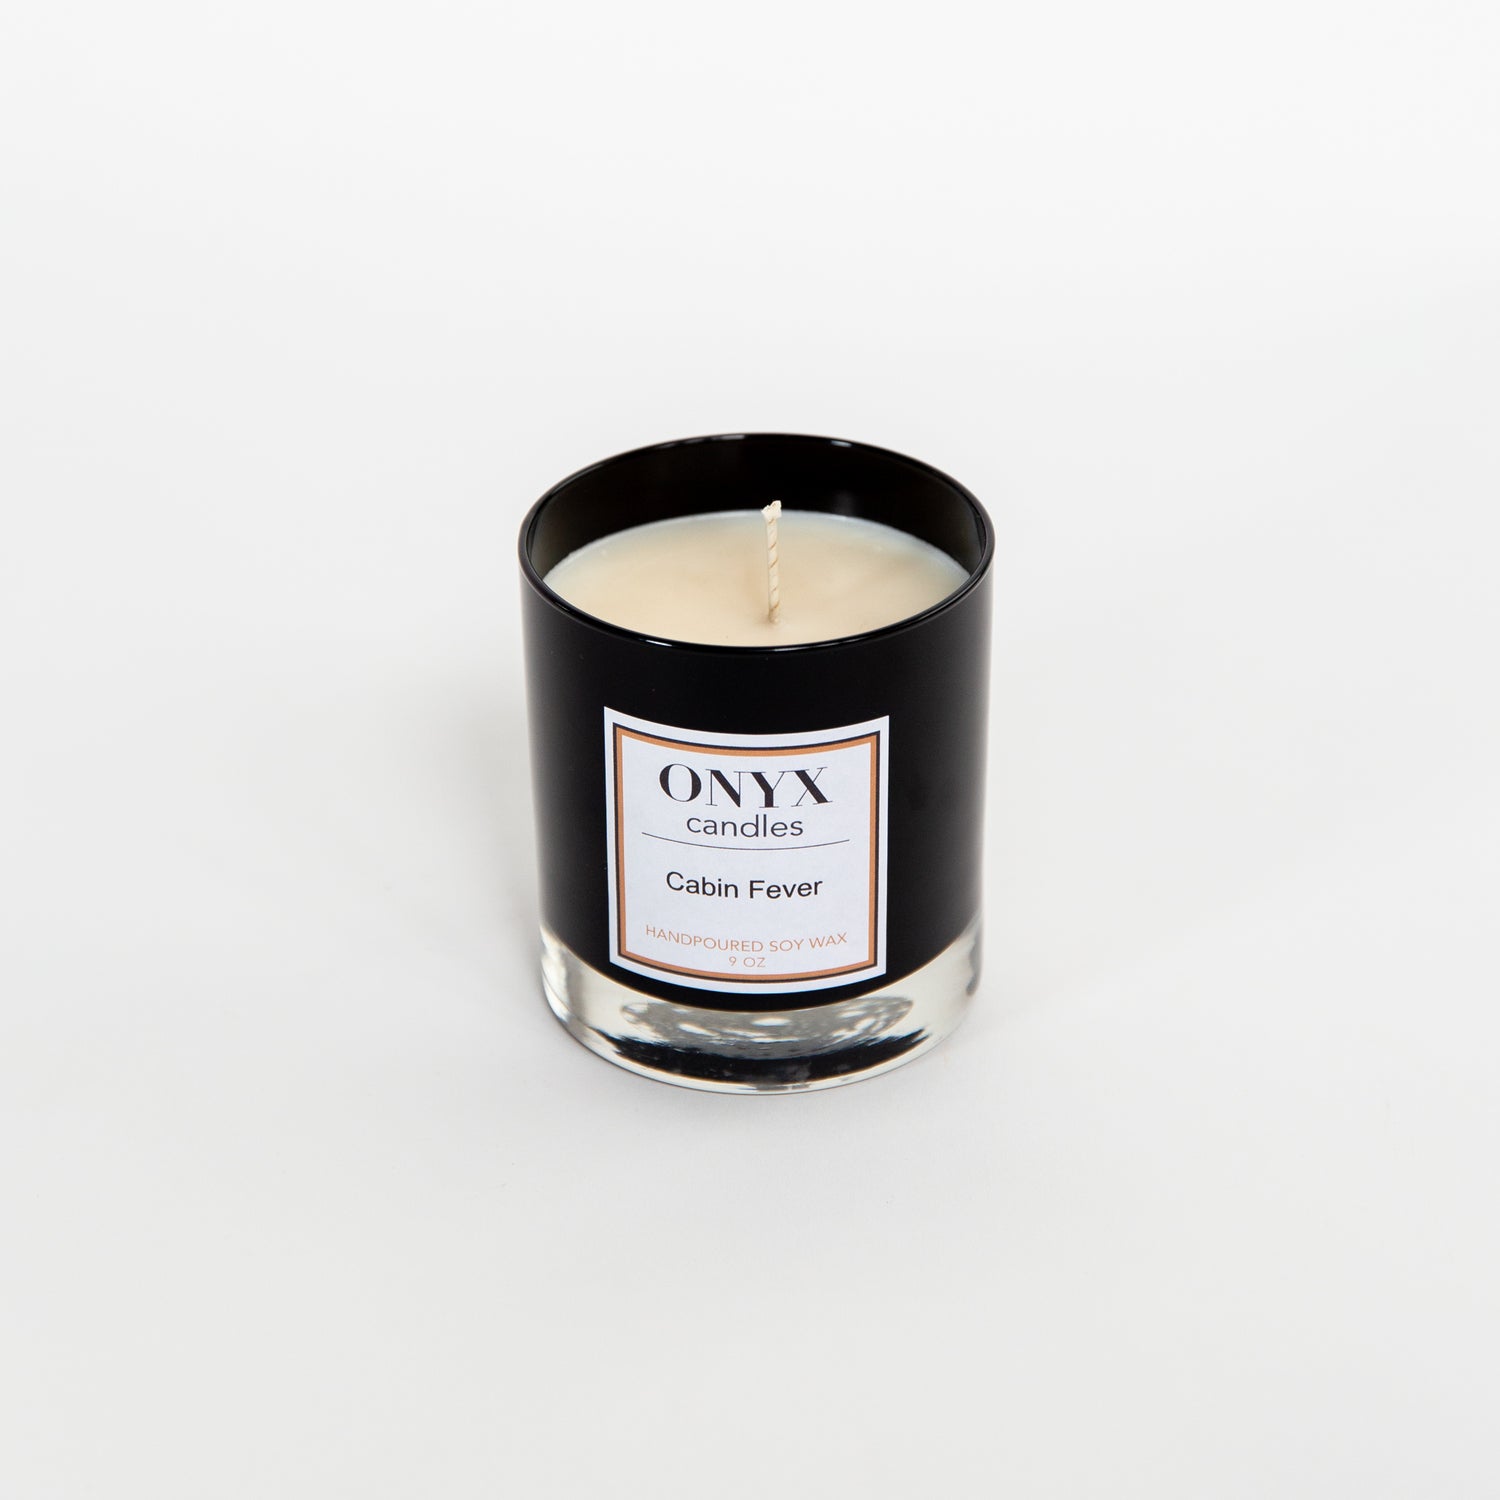 9 oz black glass candle in the scent of Cabin Fever